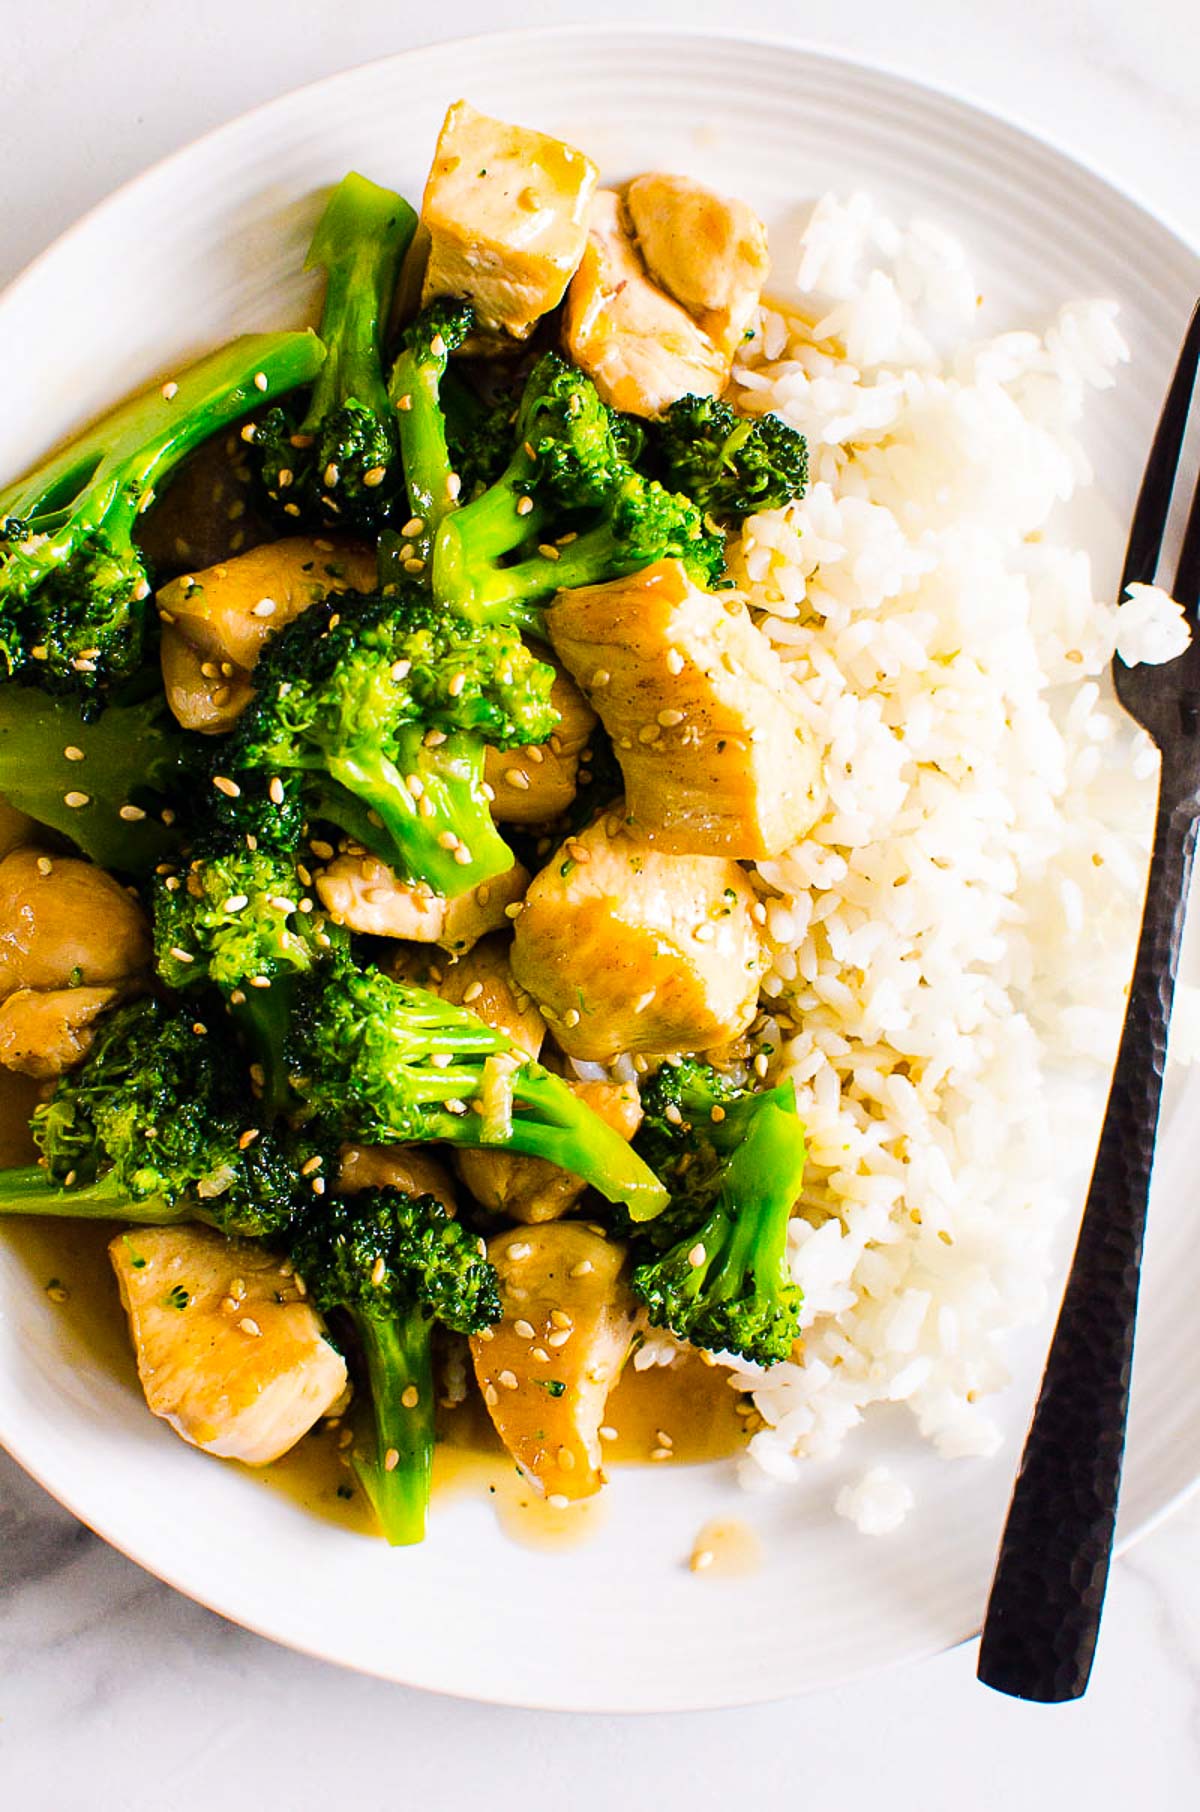 Chicken broccoli stir fry served with rice and sesame seeds and black fork.